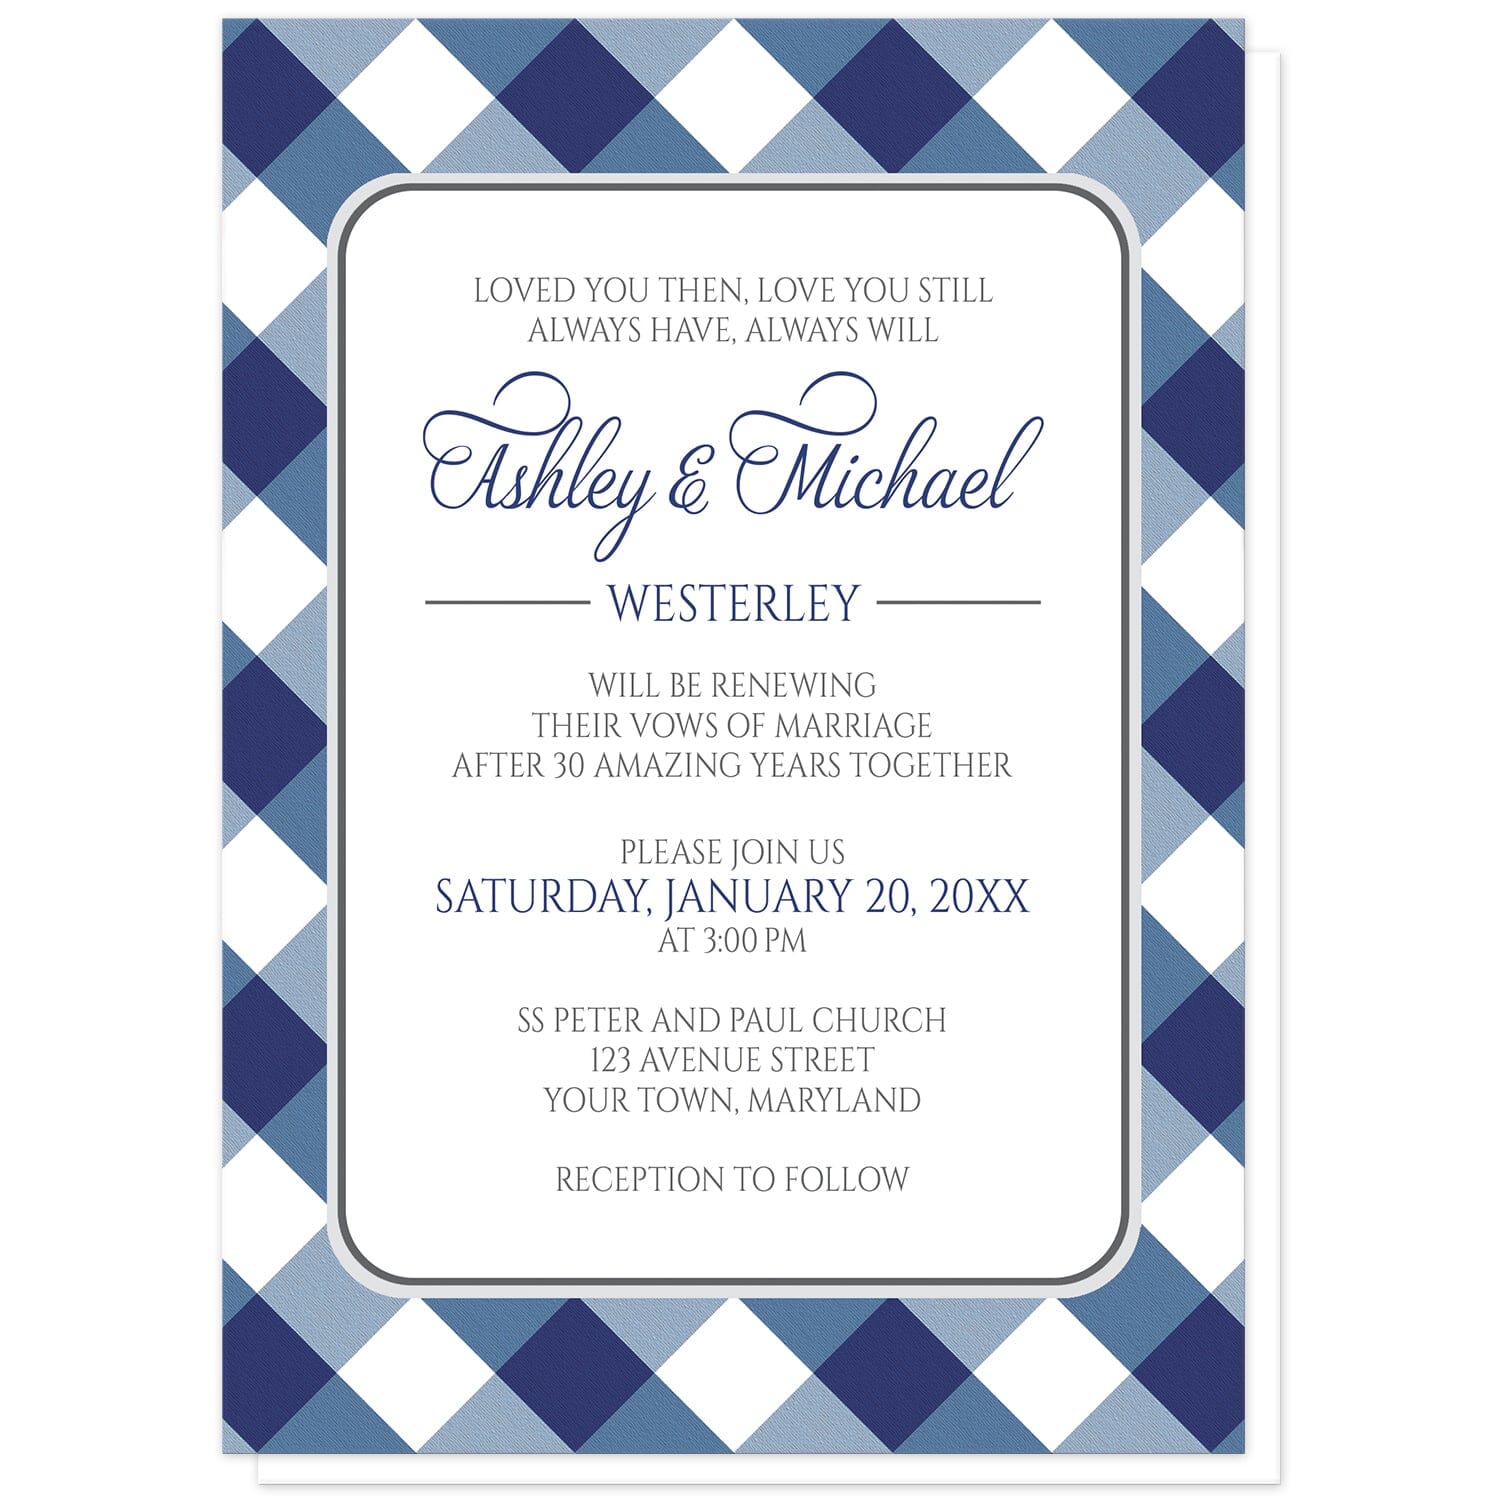 Navy Blue Gingham Vow Renewal Invitations at Artistically Invited. Navy blue gingham vow renewal invitations with your personalized vow renewal ceremony details custom printed in blue and gray inside a white rectangular area outlined in gray. The background design is a diagonal navy blue and white gingham pattern. 